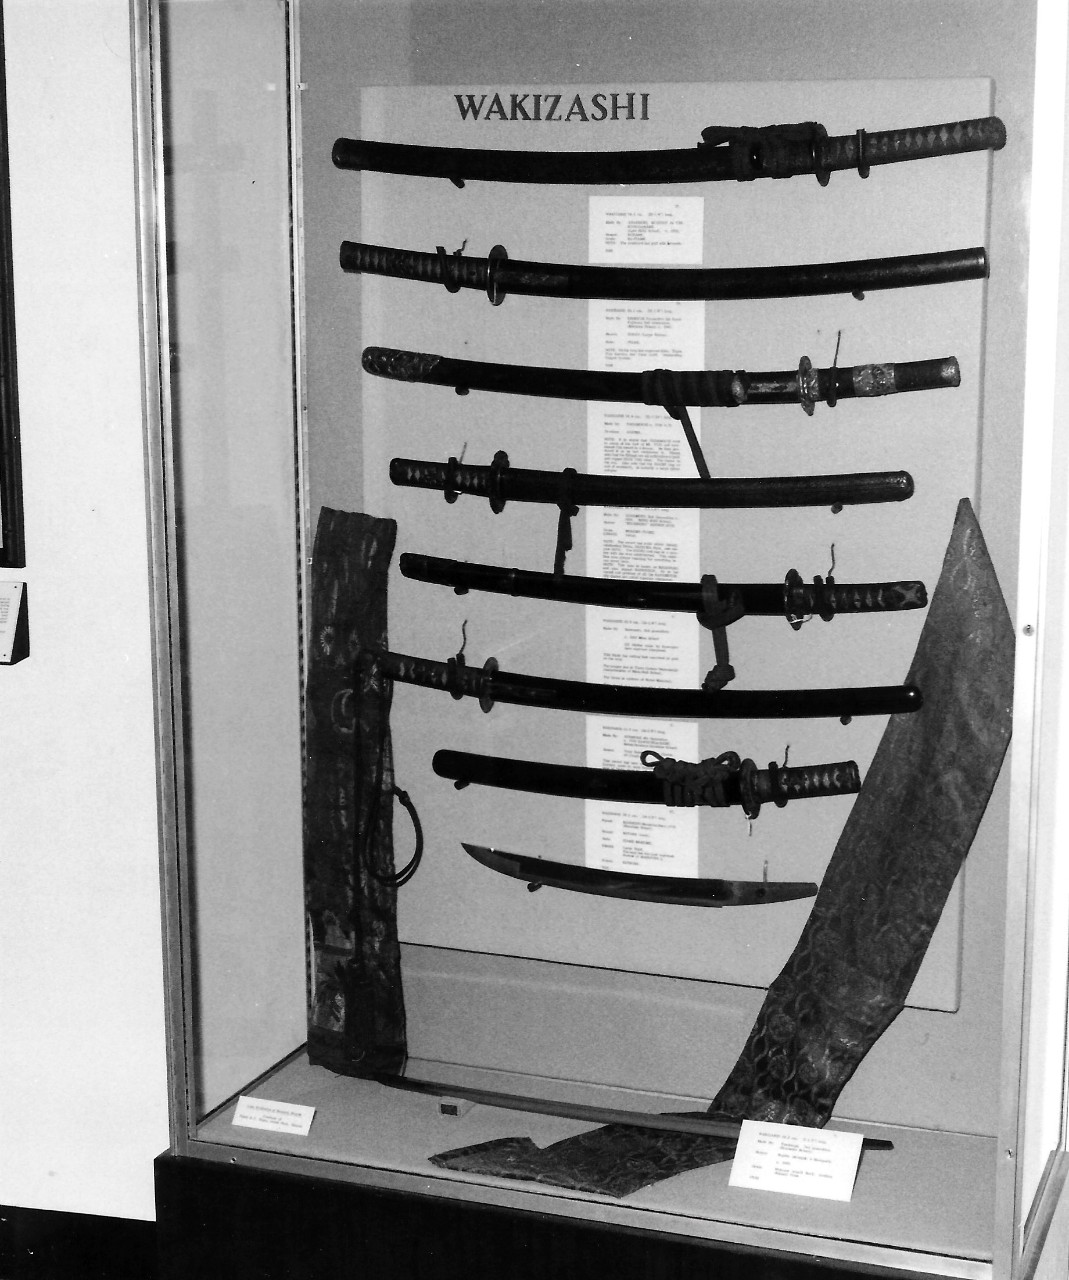 Samurai Swords Exhibit. The Navy Memorial Museum (now National Museum of the Navy). Shown: Wakizashi exhibit case. Exhibit was held from November 1977 to January 1978 and displayed thirty-seven swords from the collection of David E. J. Pepin. Nat...